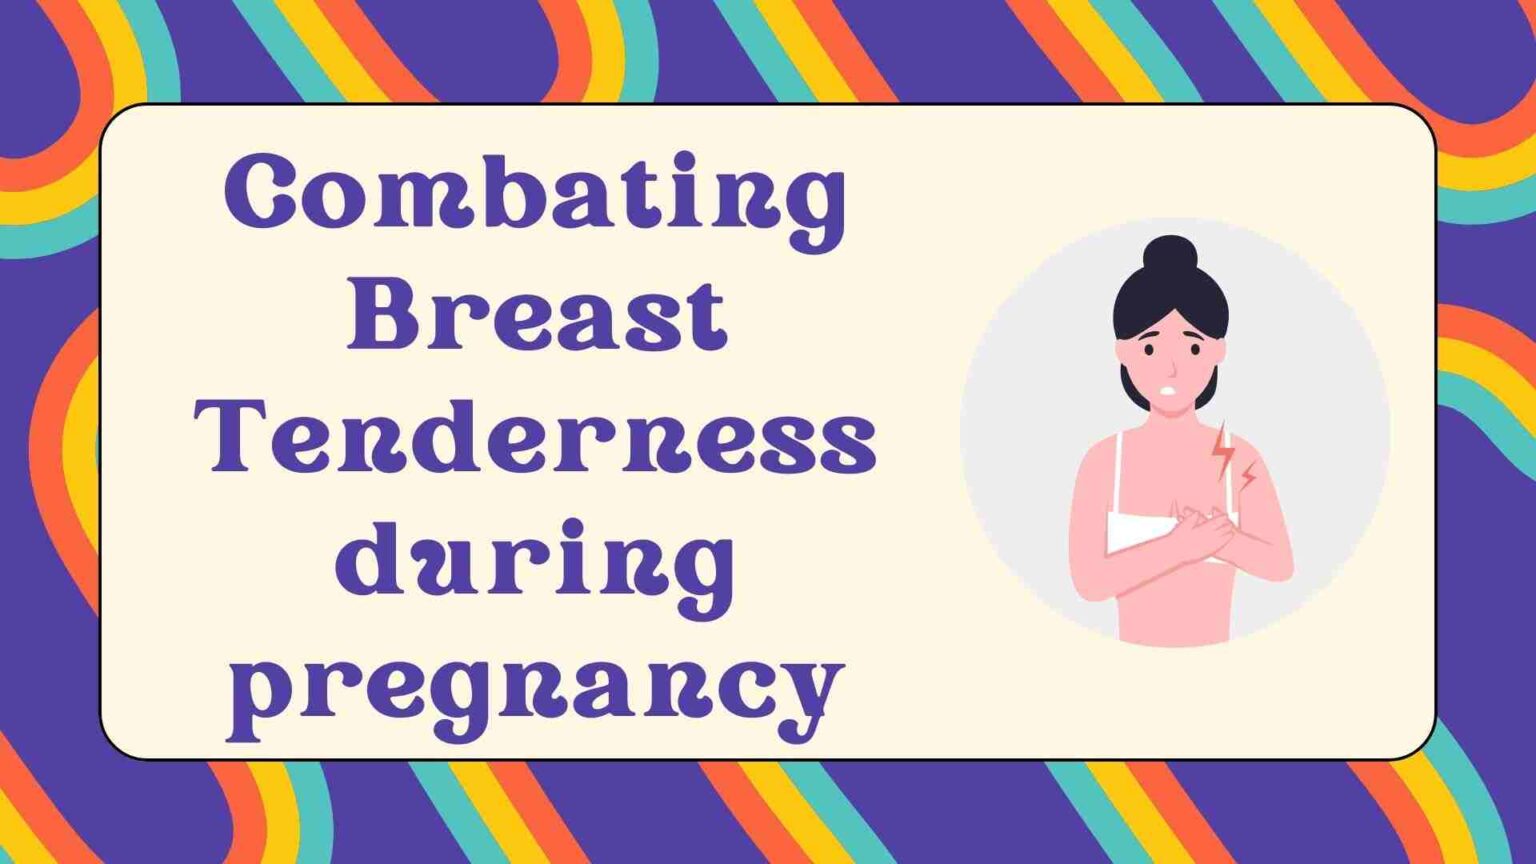 Combating Breast tenderness during pregnancy